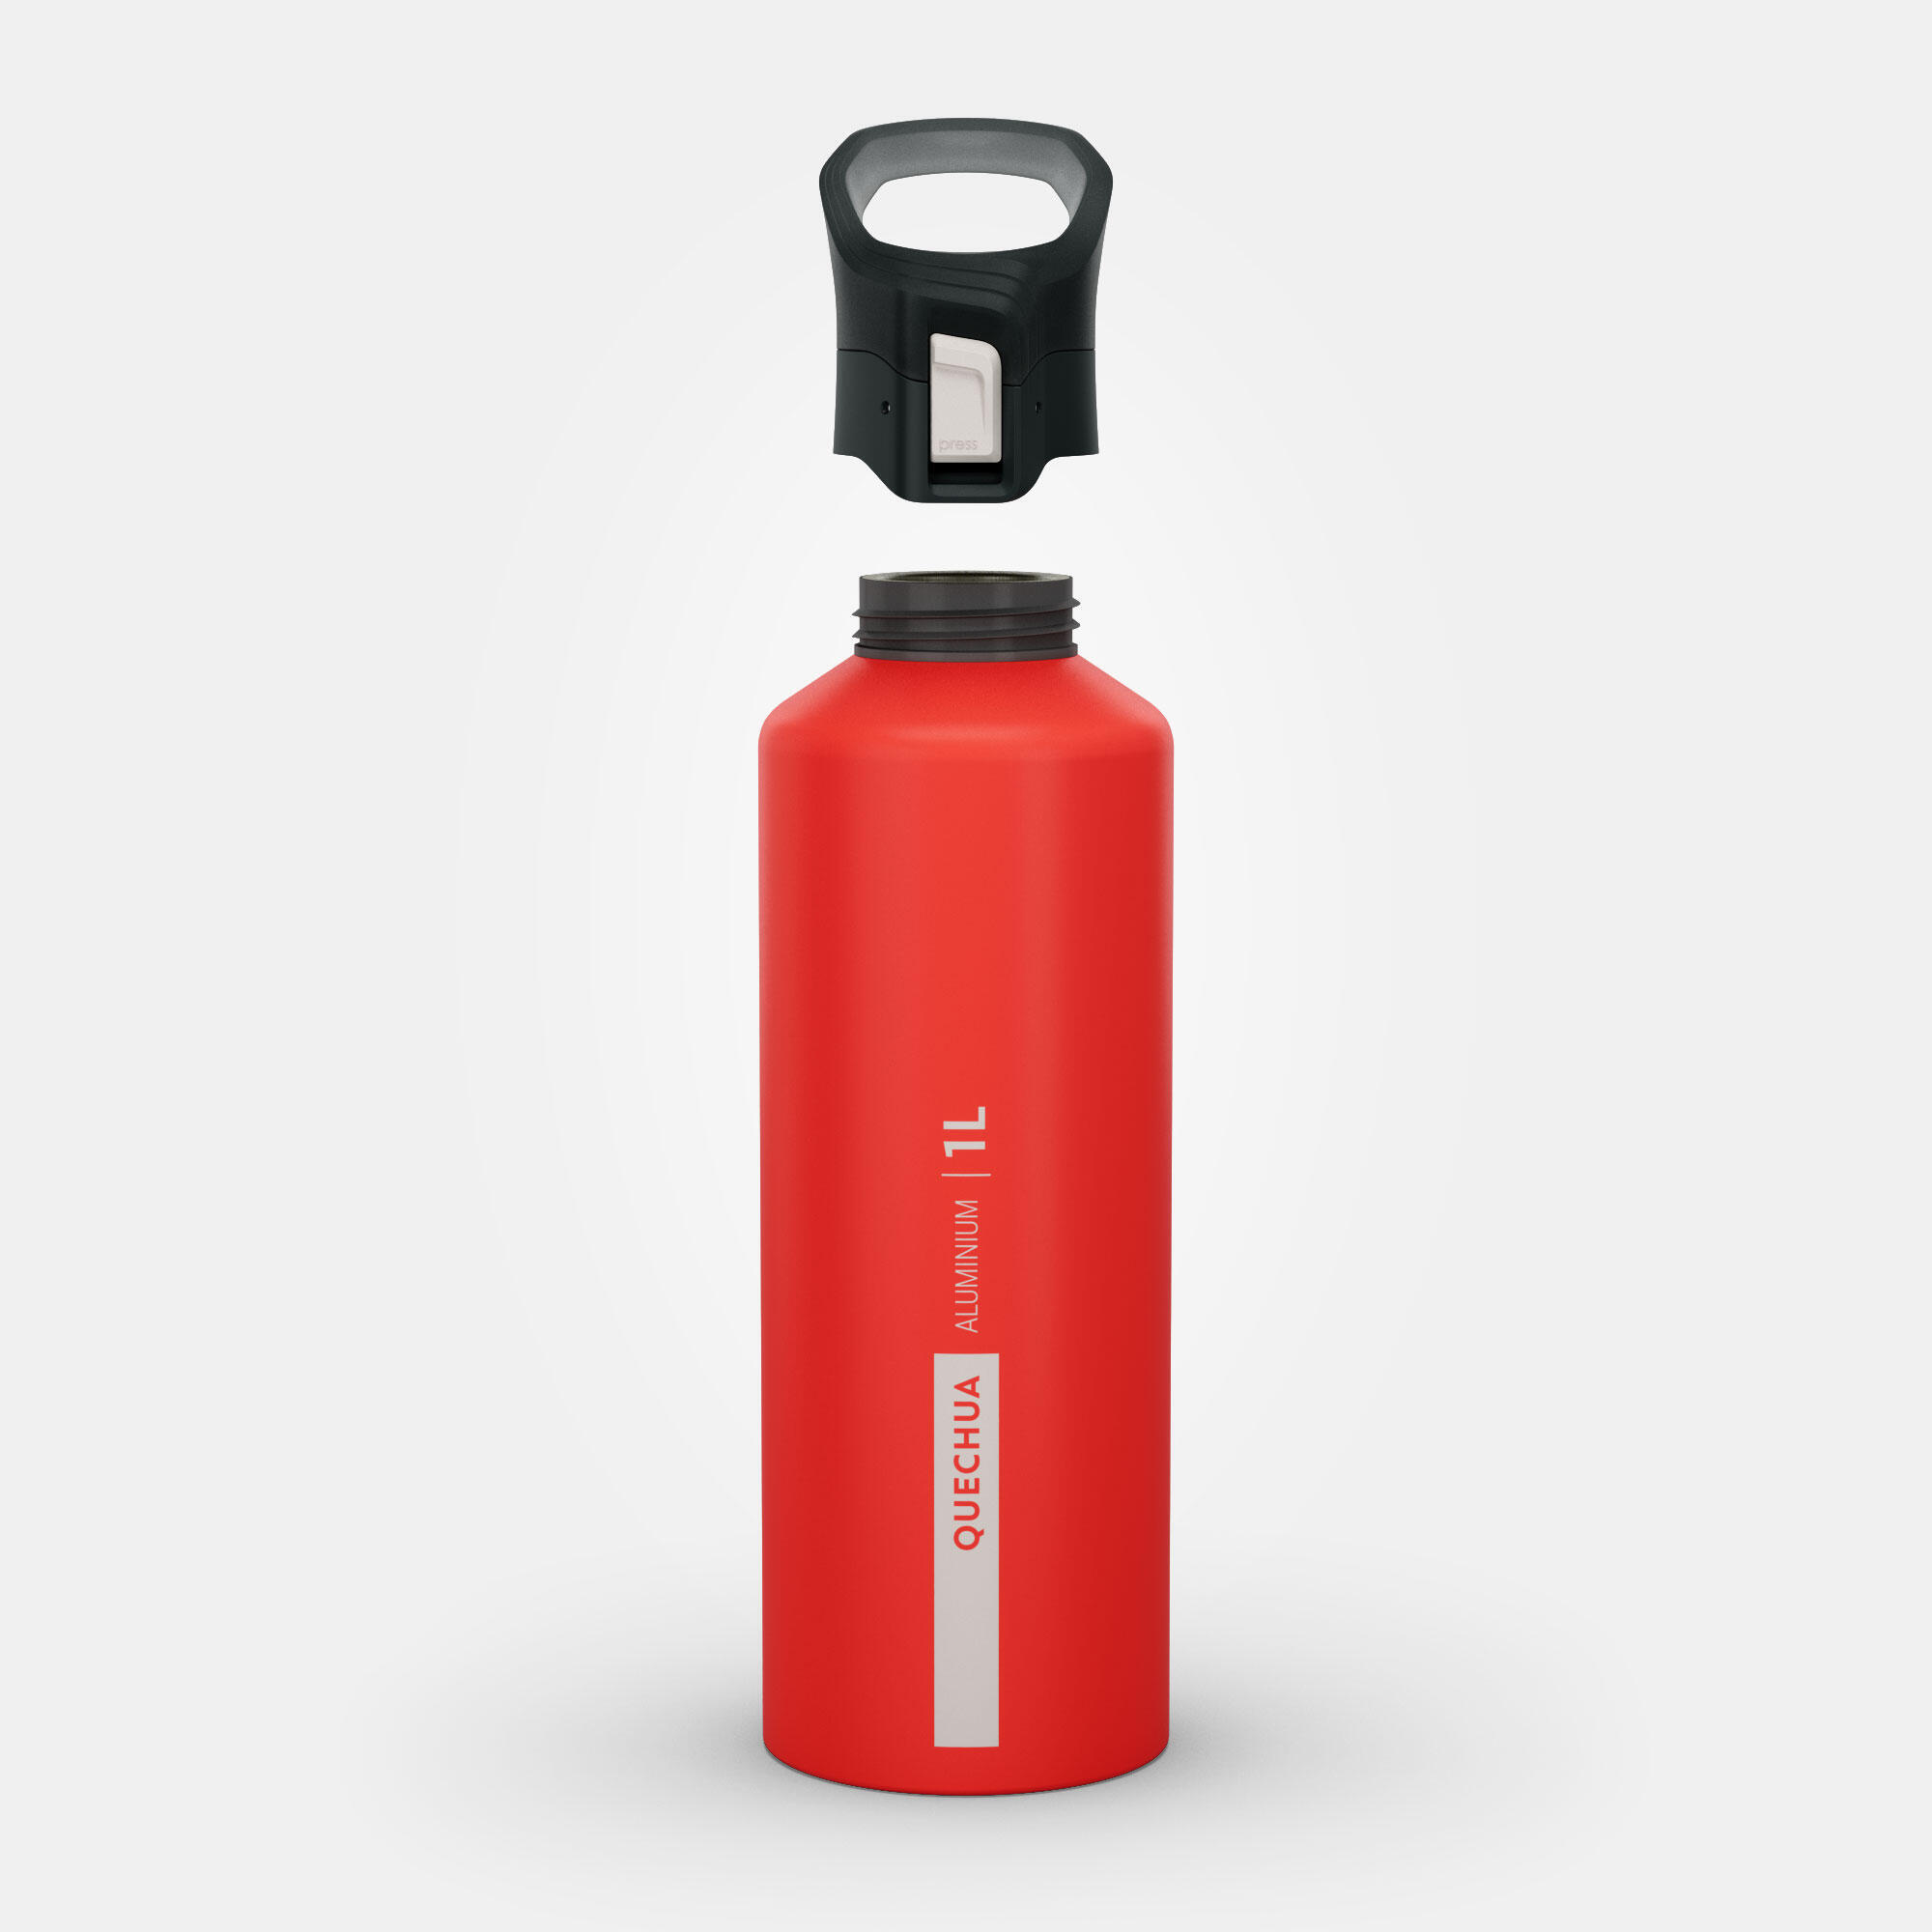 1 L aluminium water bottle with quick opening cap for hiking - Red 2/11